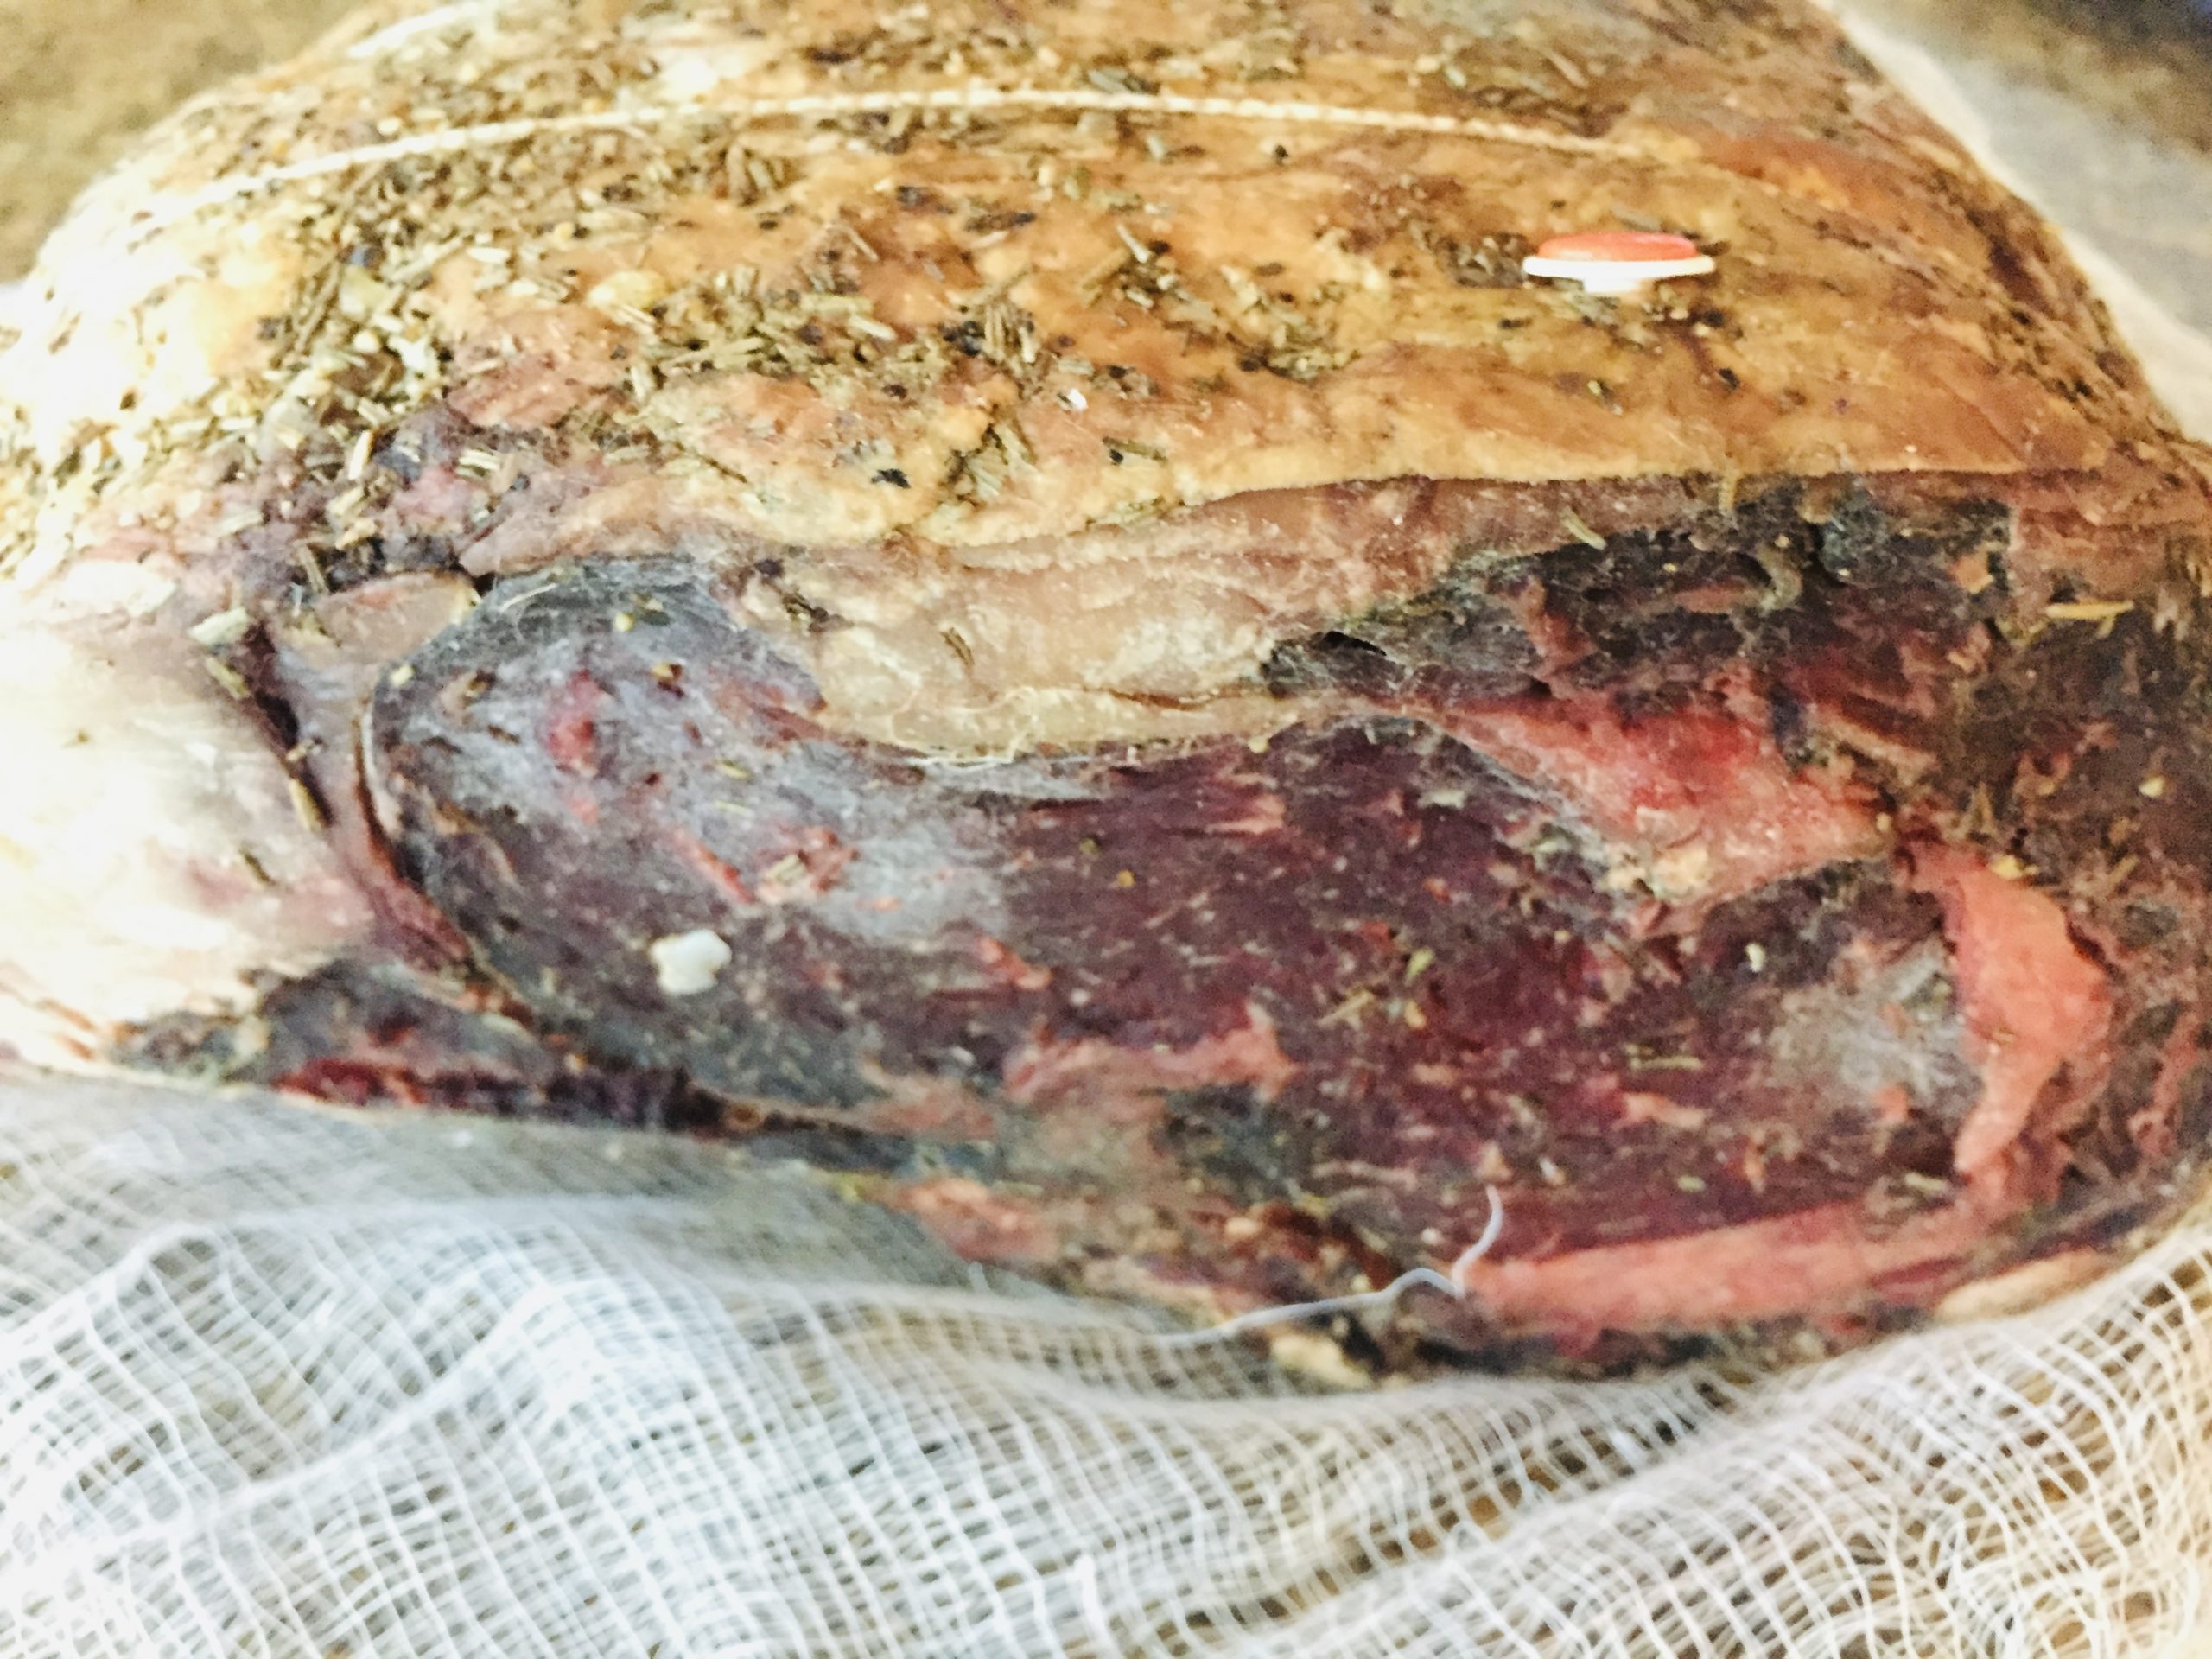 Prime rib dry aged after 14 days